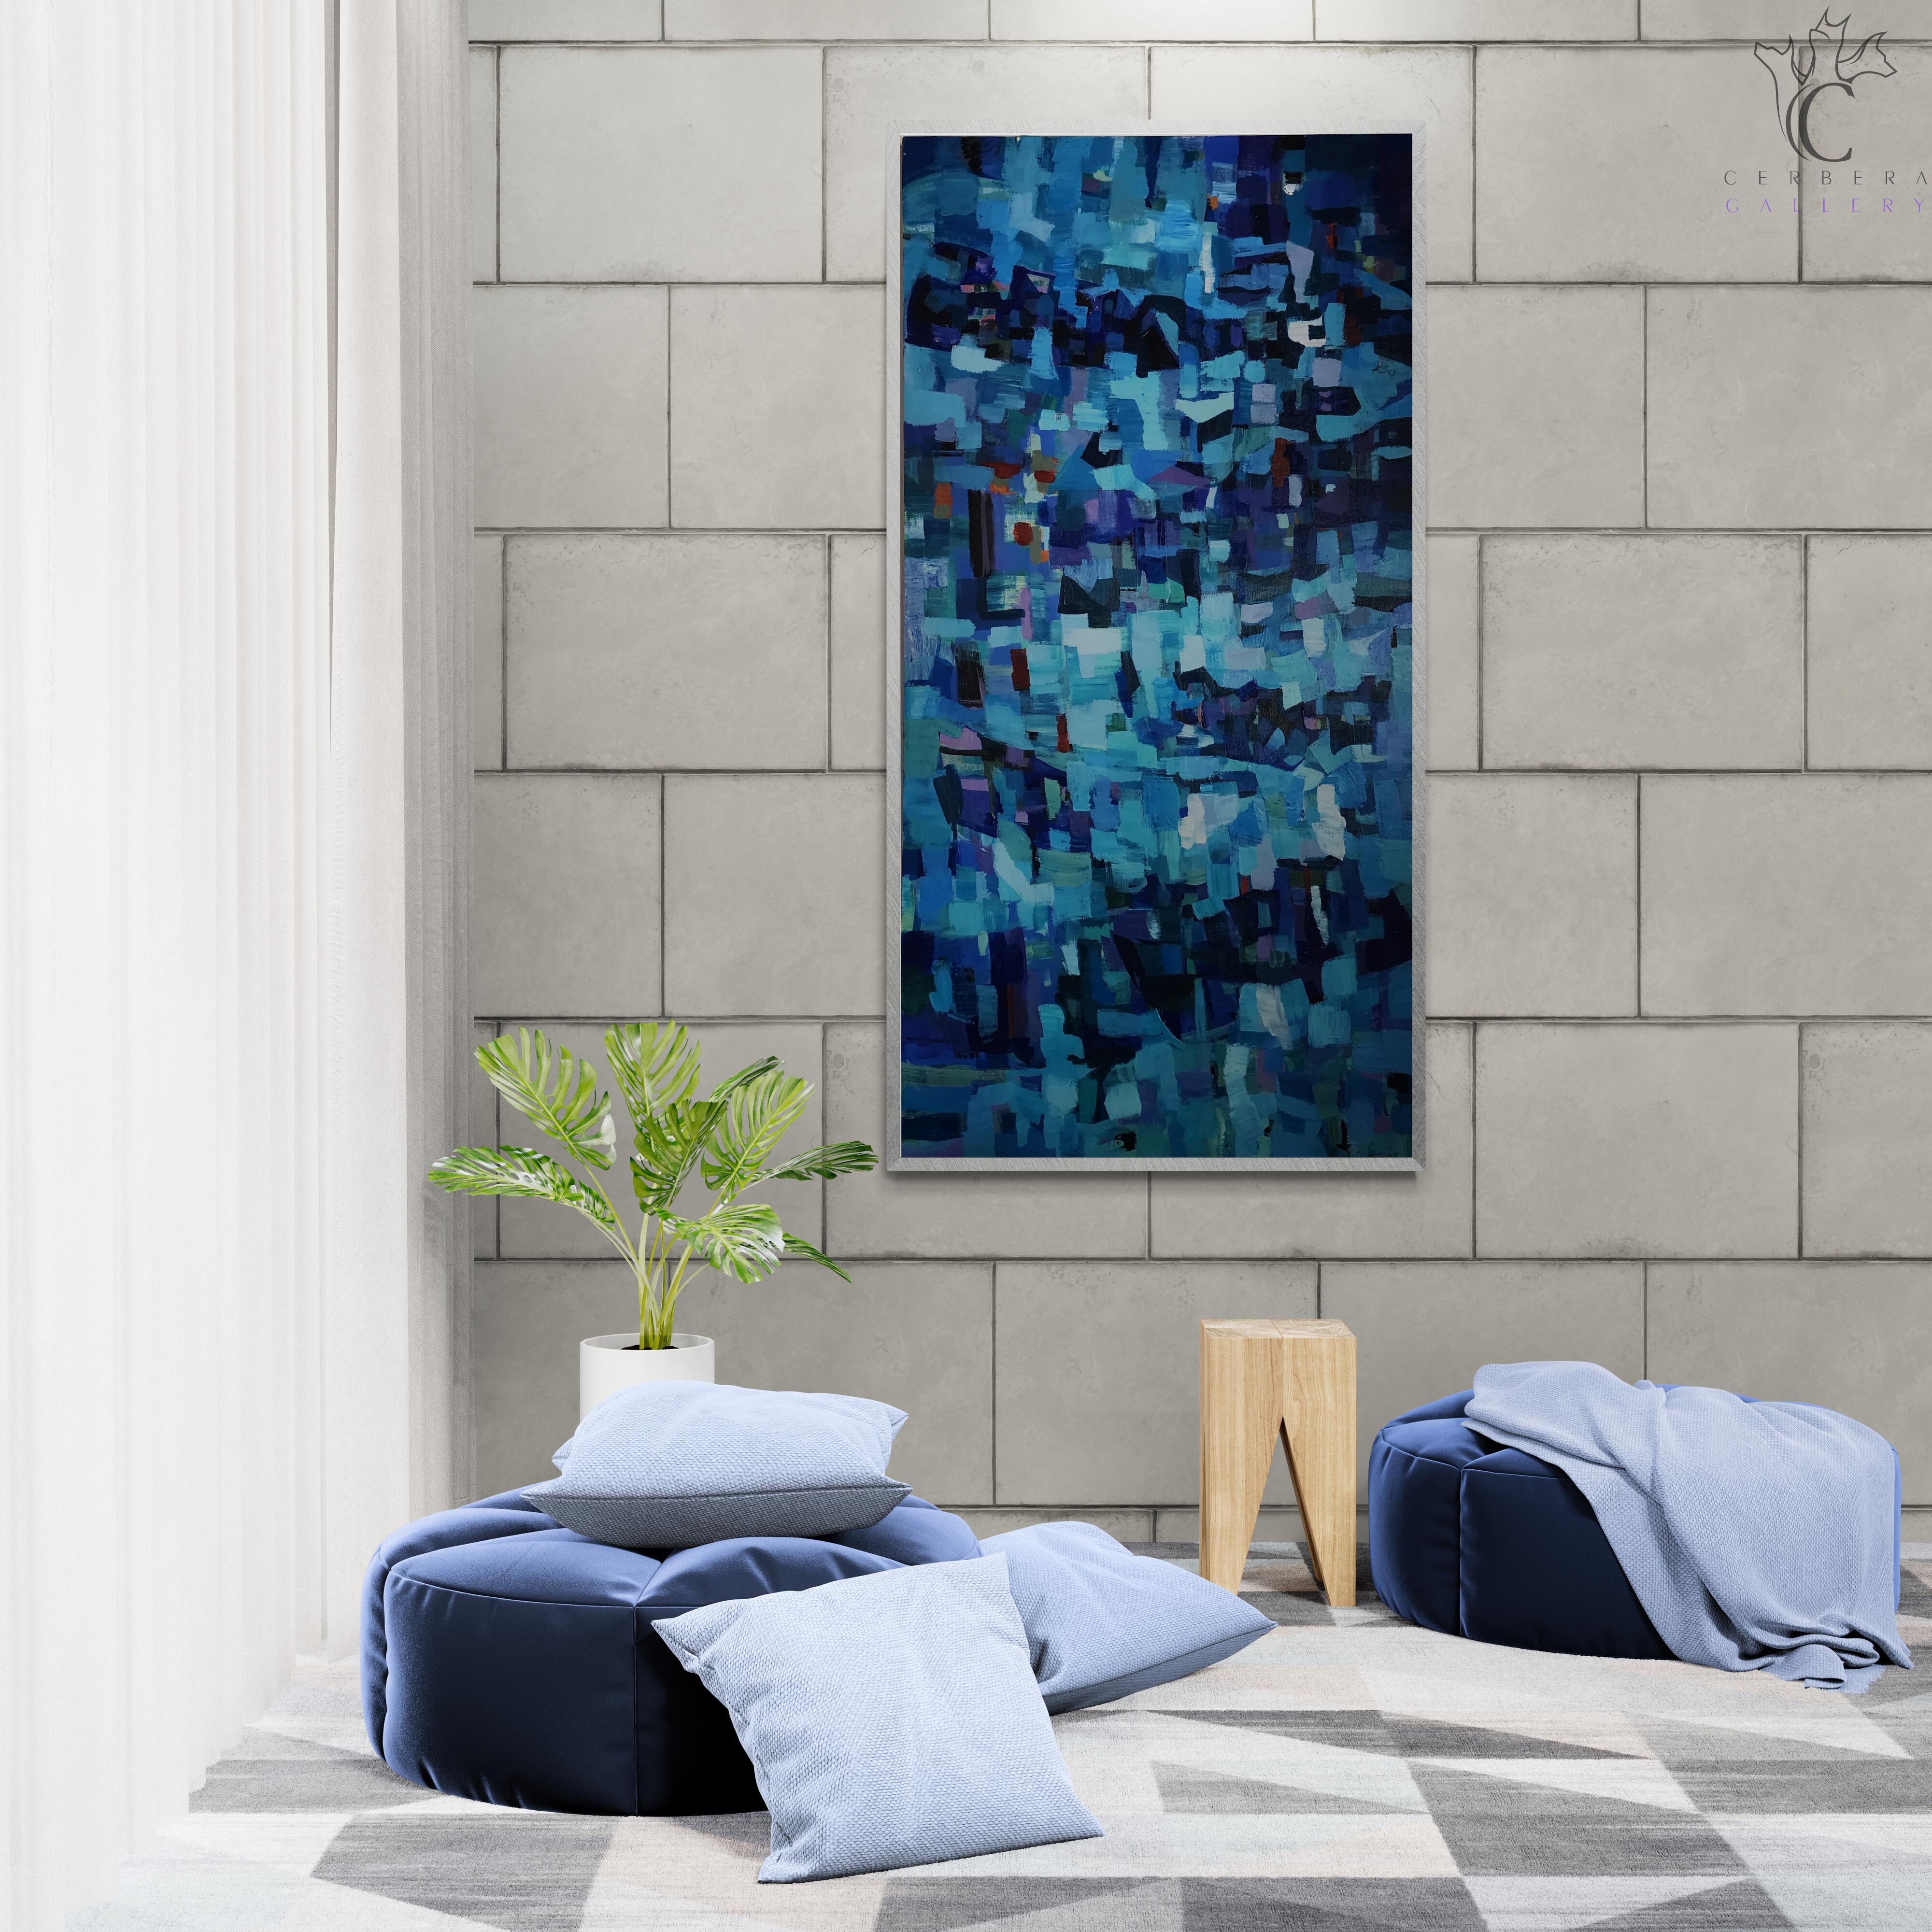 Ted Hinrichs
Ice
Acrylic on Canvas
Year: 2022
Size: 60x30x1.5in   
Signed by hand
COA provided
Ref.: 24802-1722
*on Stretcher Frame ready to hang

Tags: Abstract, Acrylic, Gestural Abstraction, Blue, Dark Blue, Navy Blue, Light Blue, Teal,